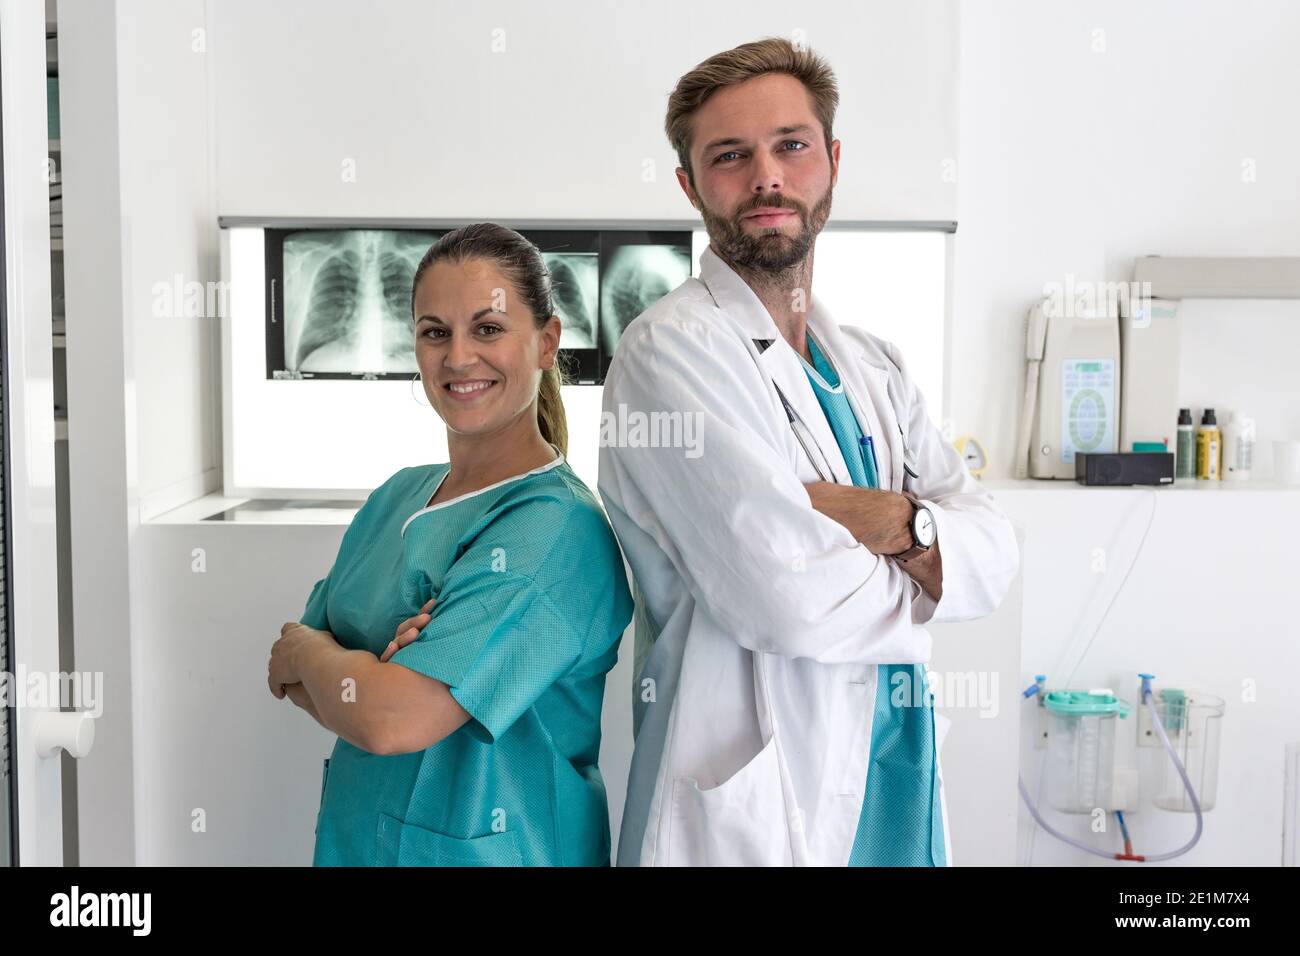 portrait of a young medical people smiling - isolated on blurred medical background with copy space Stock Photo